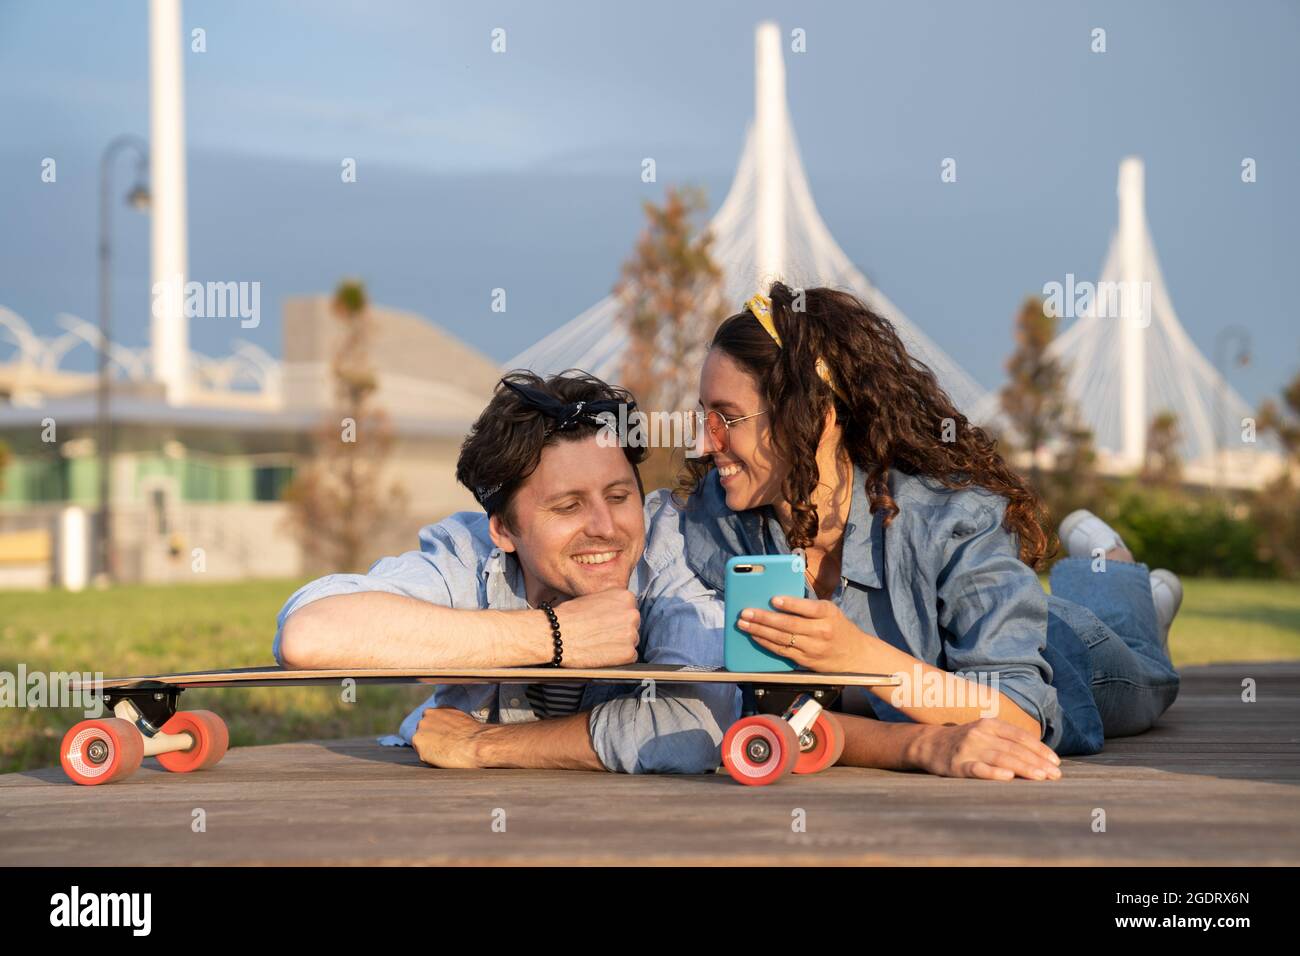 Happy smiling woman show man message on smartphone lying on skateboard outdoor in summer urban park Stock Photo